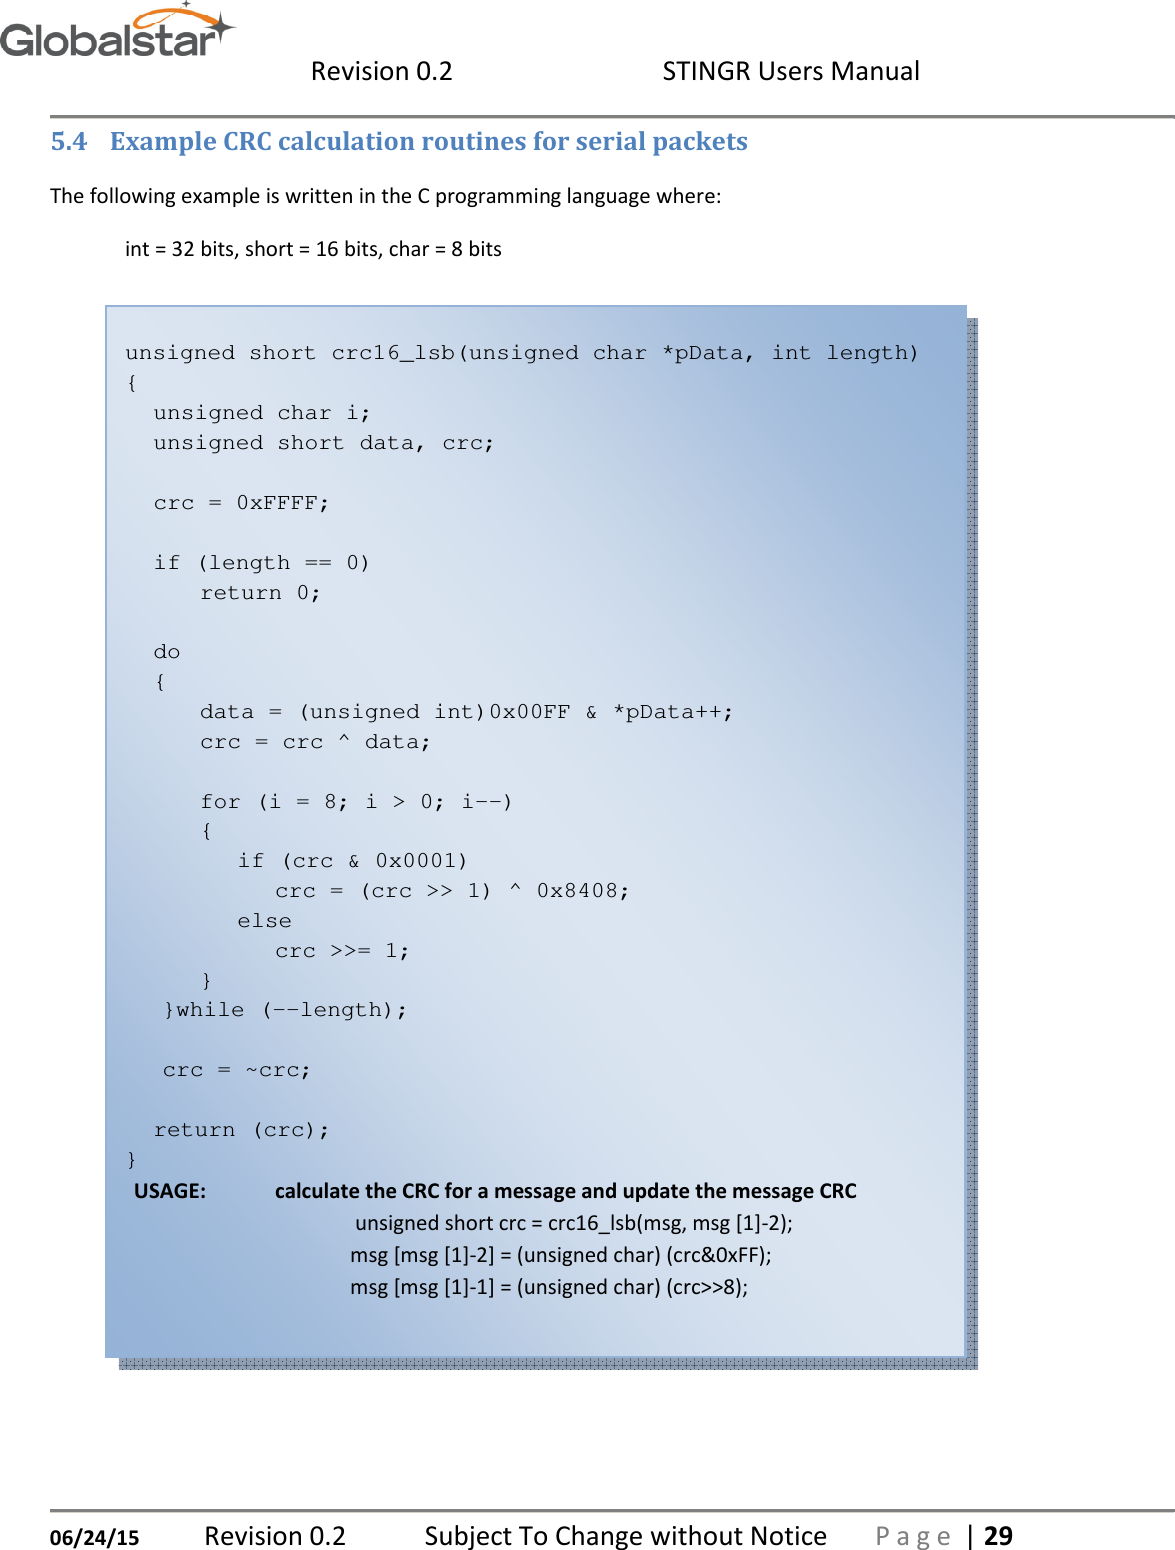  Revision 0.2  STINGR Users Manual   06/24/15 Revision 0.2   Subject To Change without Notice  P a g e  | 29 5.4 Example CRC calculation routines for serial packets The following example is written in the C programming language where: int = 32 bits, short = 16 bits, char = 8 bits  unsigned short crc16_lsb(unsigned char *pData, int length) { unsigned char i; unsigned short data, crc;  crc = 0xFFFF;  if (length == 0)       return 0;  do {       data = (unsigned int)0x00FF &amp; *pData++;       crc = crc ^ data;        for (i = 8; i &gt; 0; i--)       {         if (crc &amp; 0x0001)           crc = (crc &gt;&gt; 1) ^ 0x8408;         else           crc &gt;&gt;= 1;       }     }while (--length);      crc = ~crc;  return (crc); } USAGE:  calculate the CRC for a message and update the message CRC  unsigned short crc = crc16_lsb(msg, msg [1]-2); msg [msg [1]-2] = (unsigned char) (crc&amp;0xFF); msg [msg [1]-1] = (unsigned char) (crc&gt;&gt;8);   